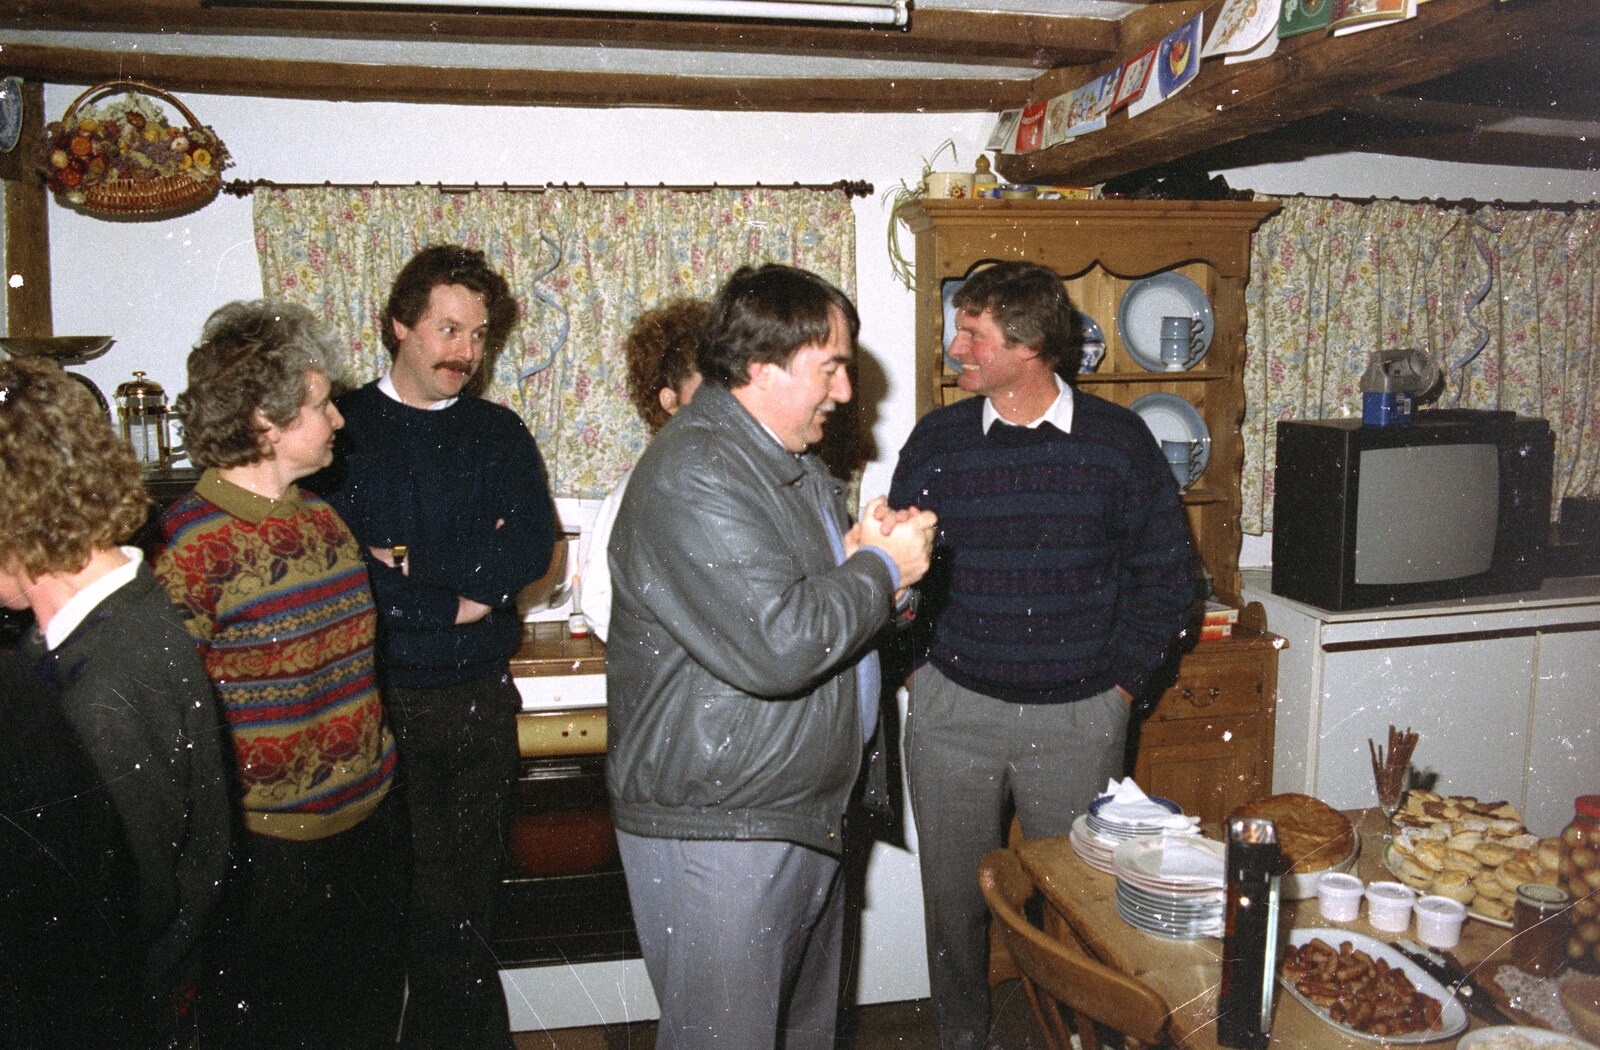 Milling around in Kipper's kitchen from Christmas in Devon and Stuston - 25th December 1991